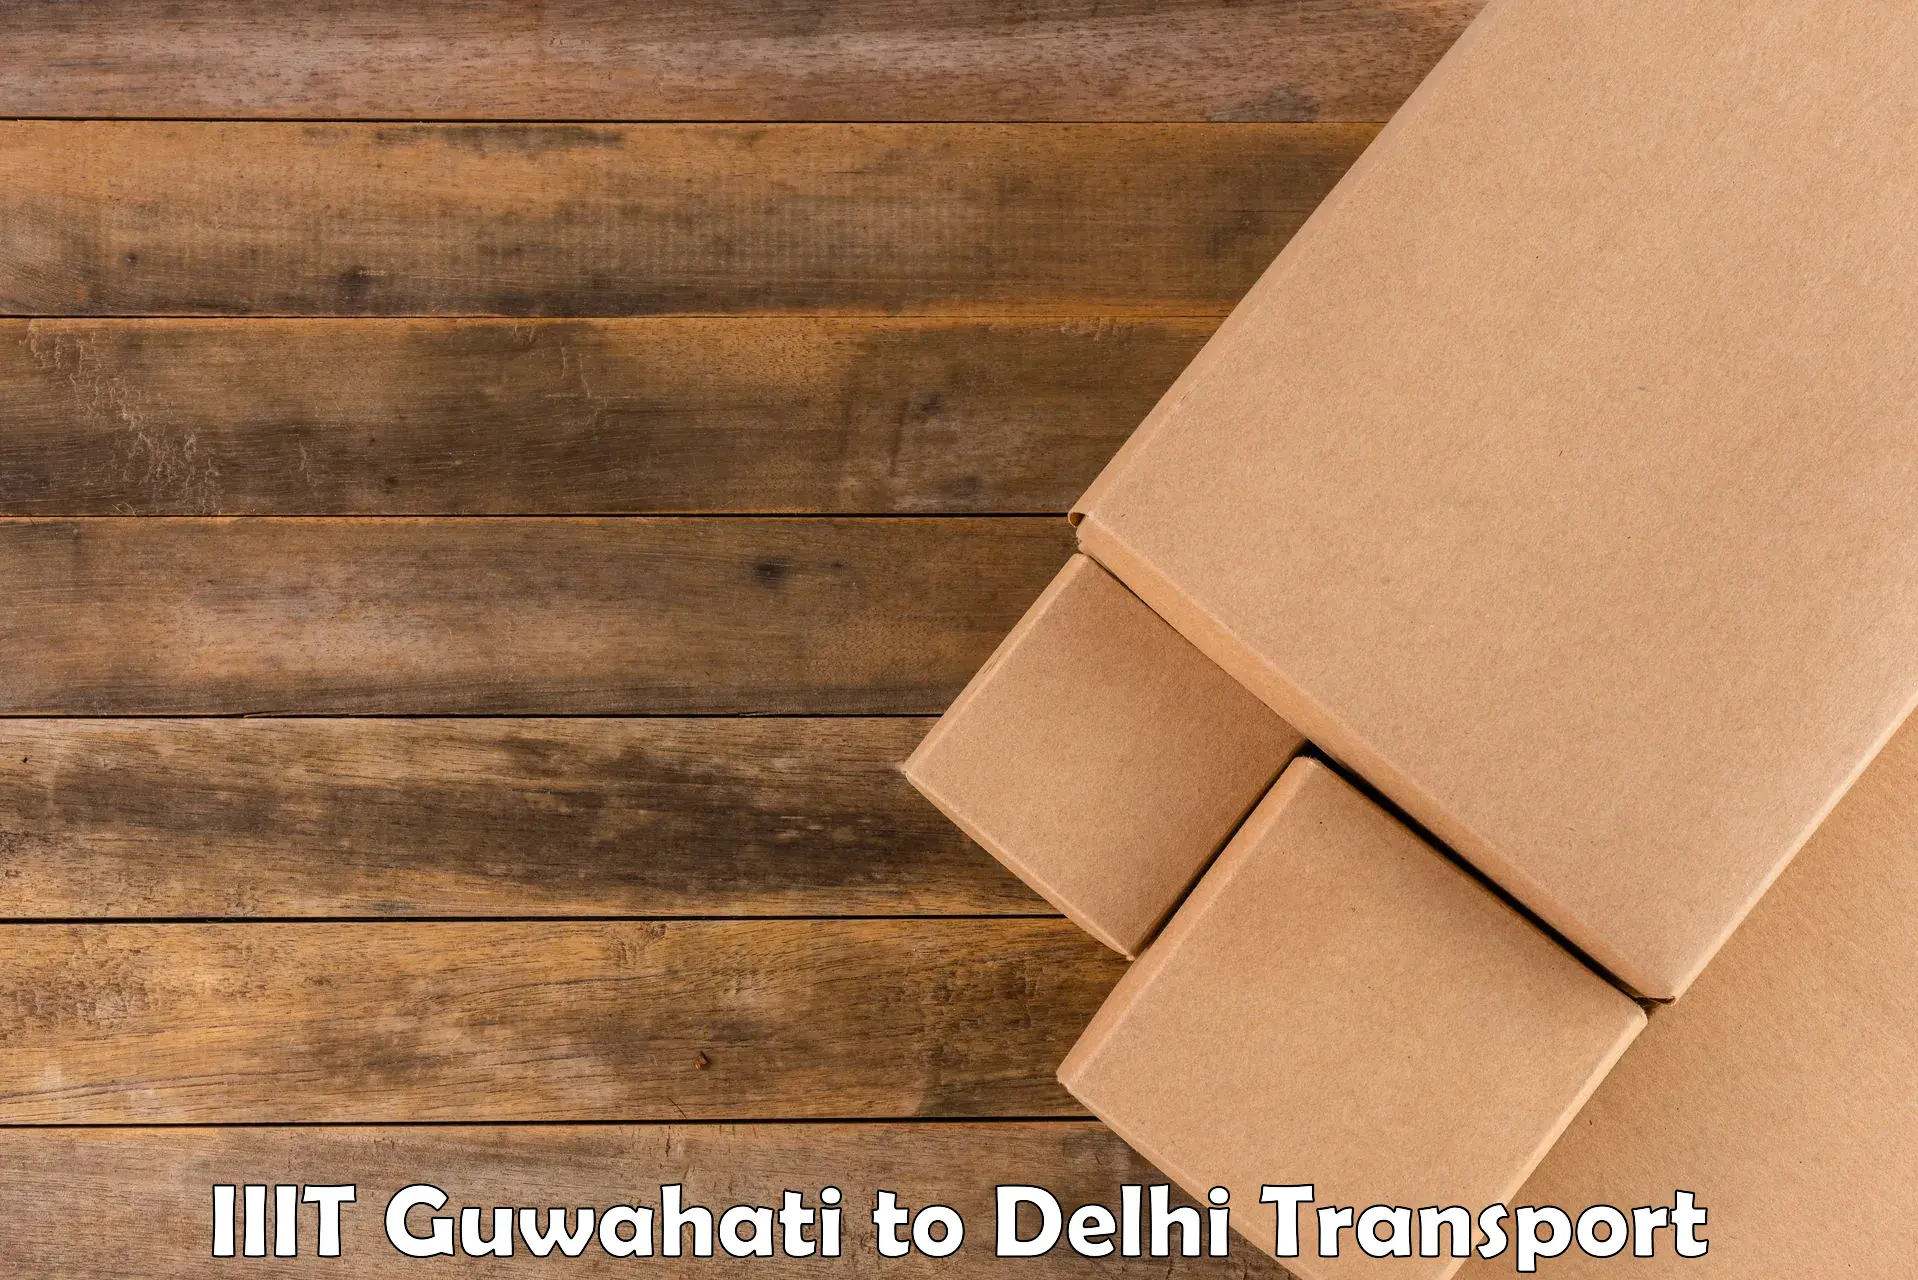 Cargo train transport services IIIT Guwahati to NCR